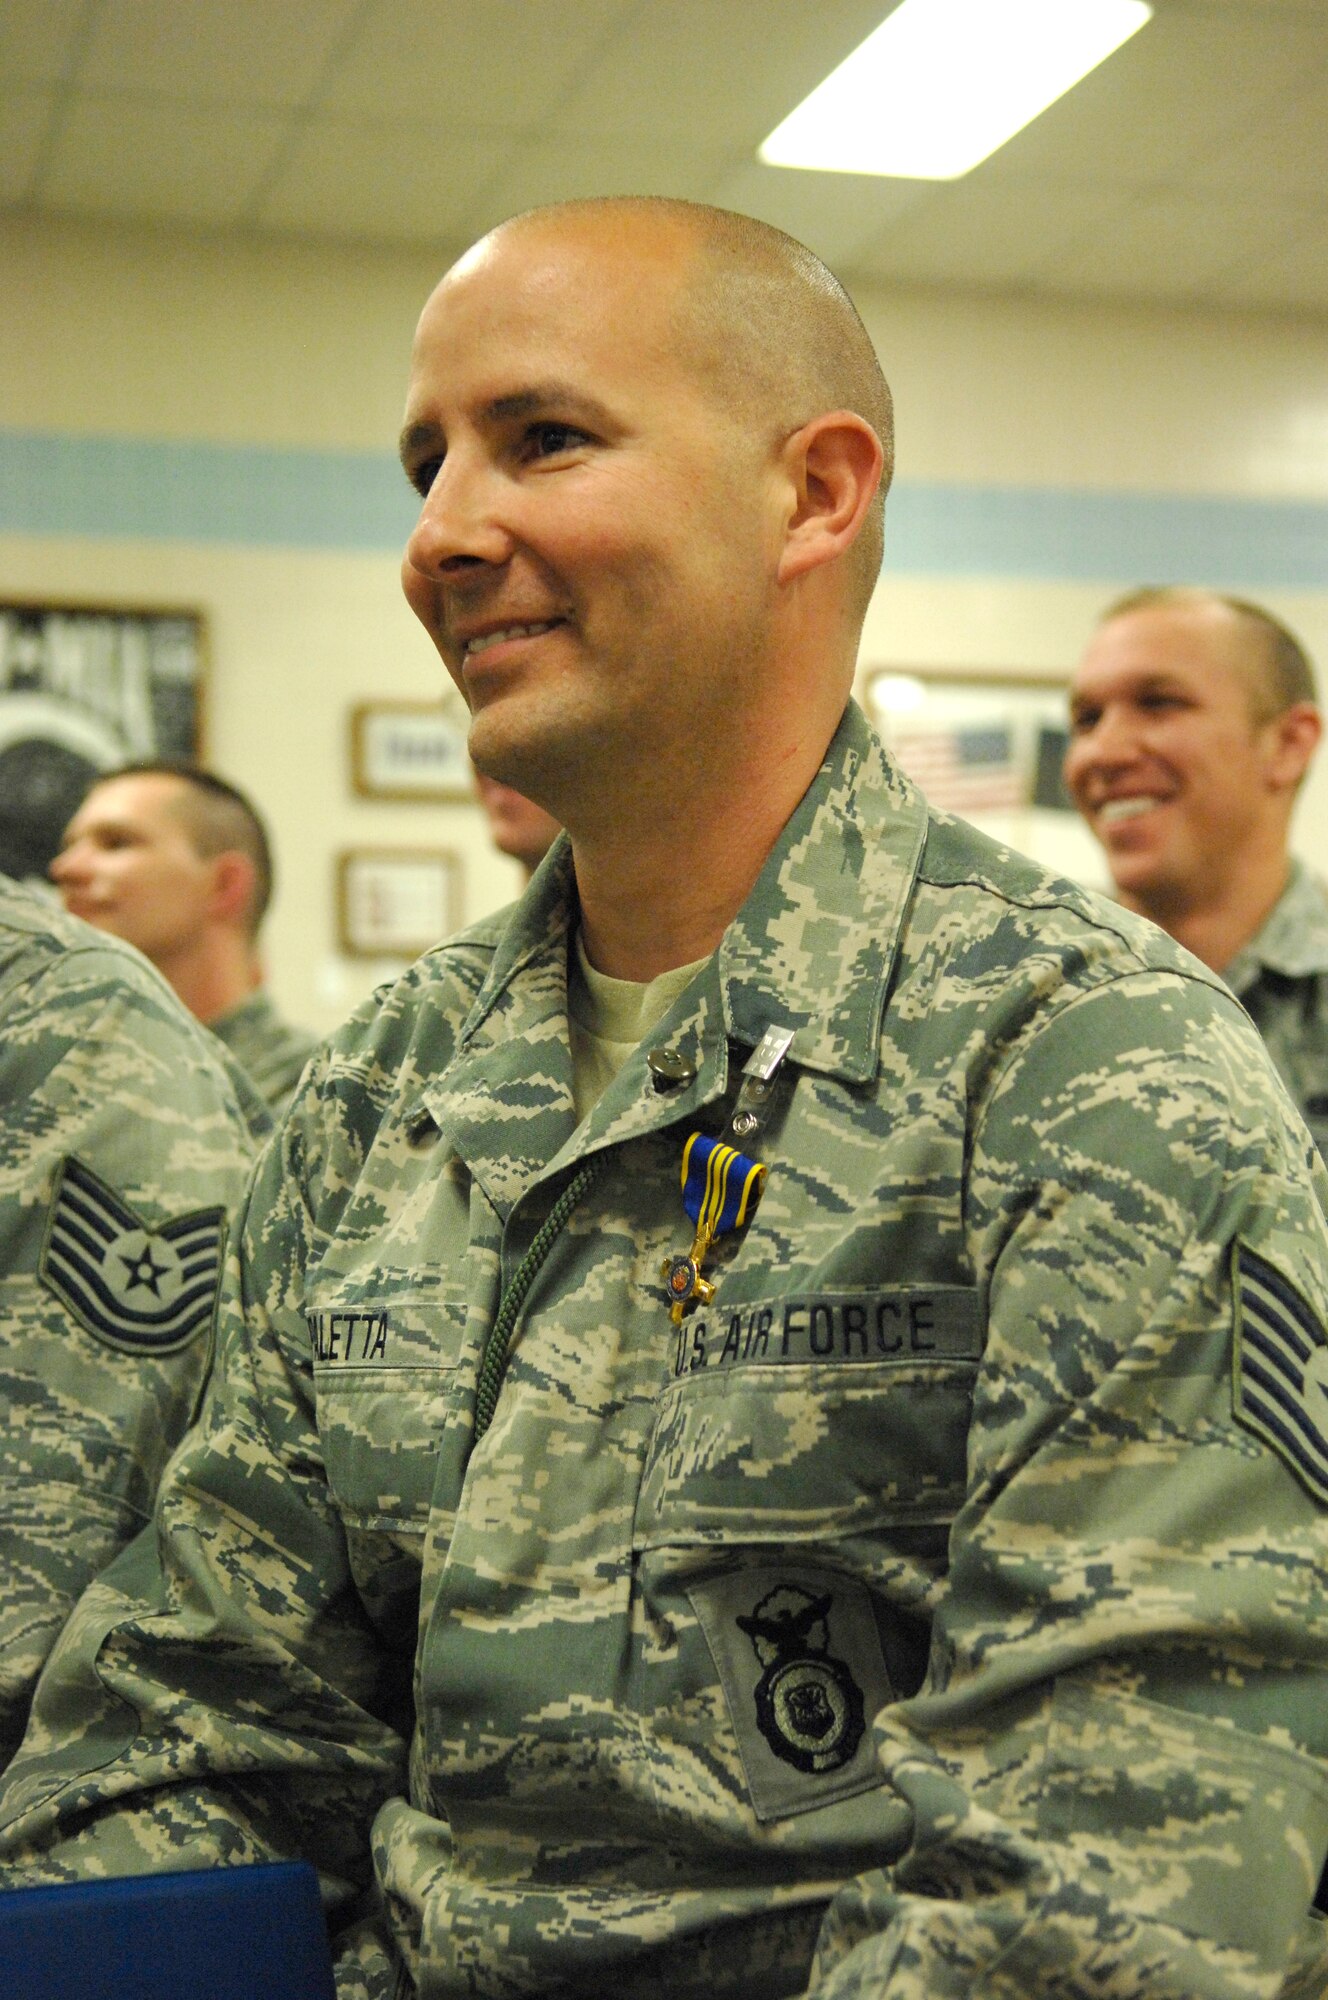 Tech Sgt. Mike Paletta, a Utah Air National Guardsman from the 151st Security Forces Squadron, was awarded the Utah Cross for heroism during a ceremony at the Utah ANG base April 6.